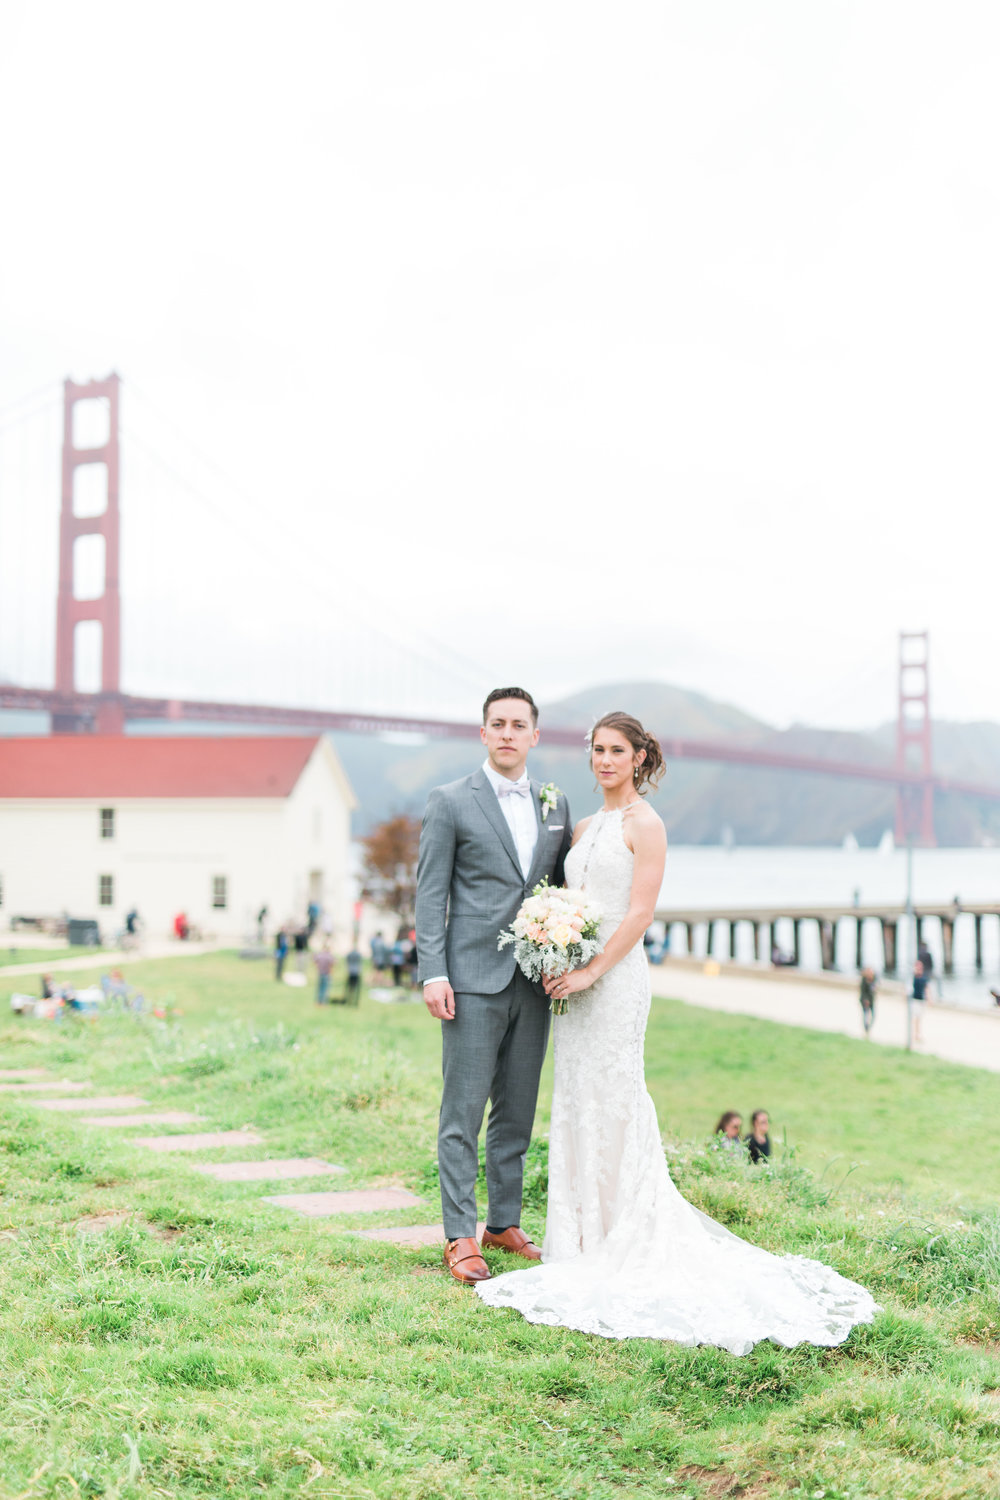 Best Engagement Photo Locations in SF - Crissy Field Engagement Photos by JBJ Pictures (17).jpg